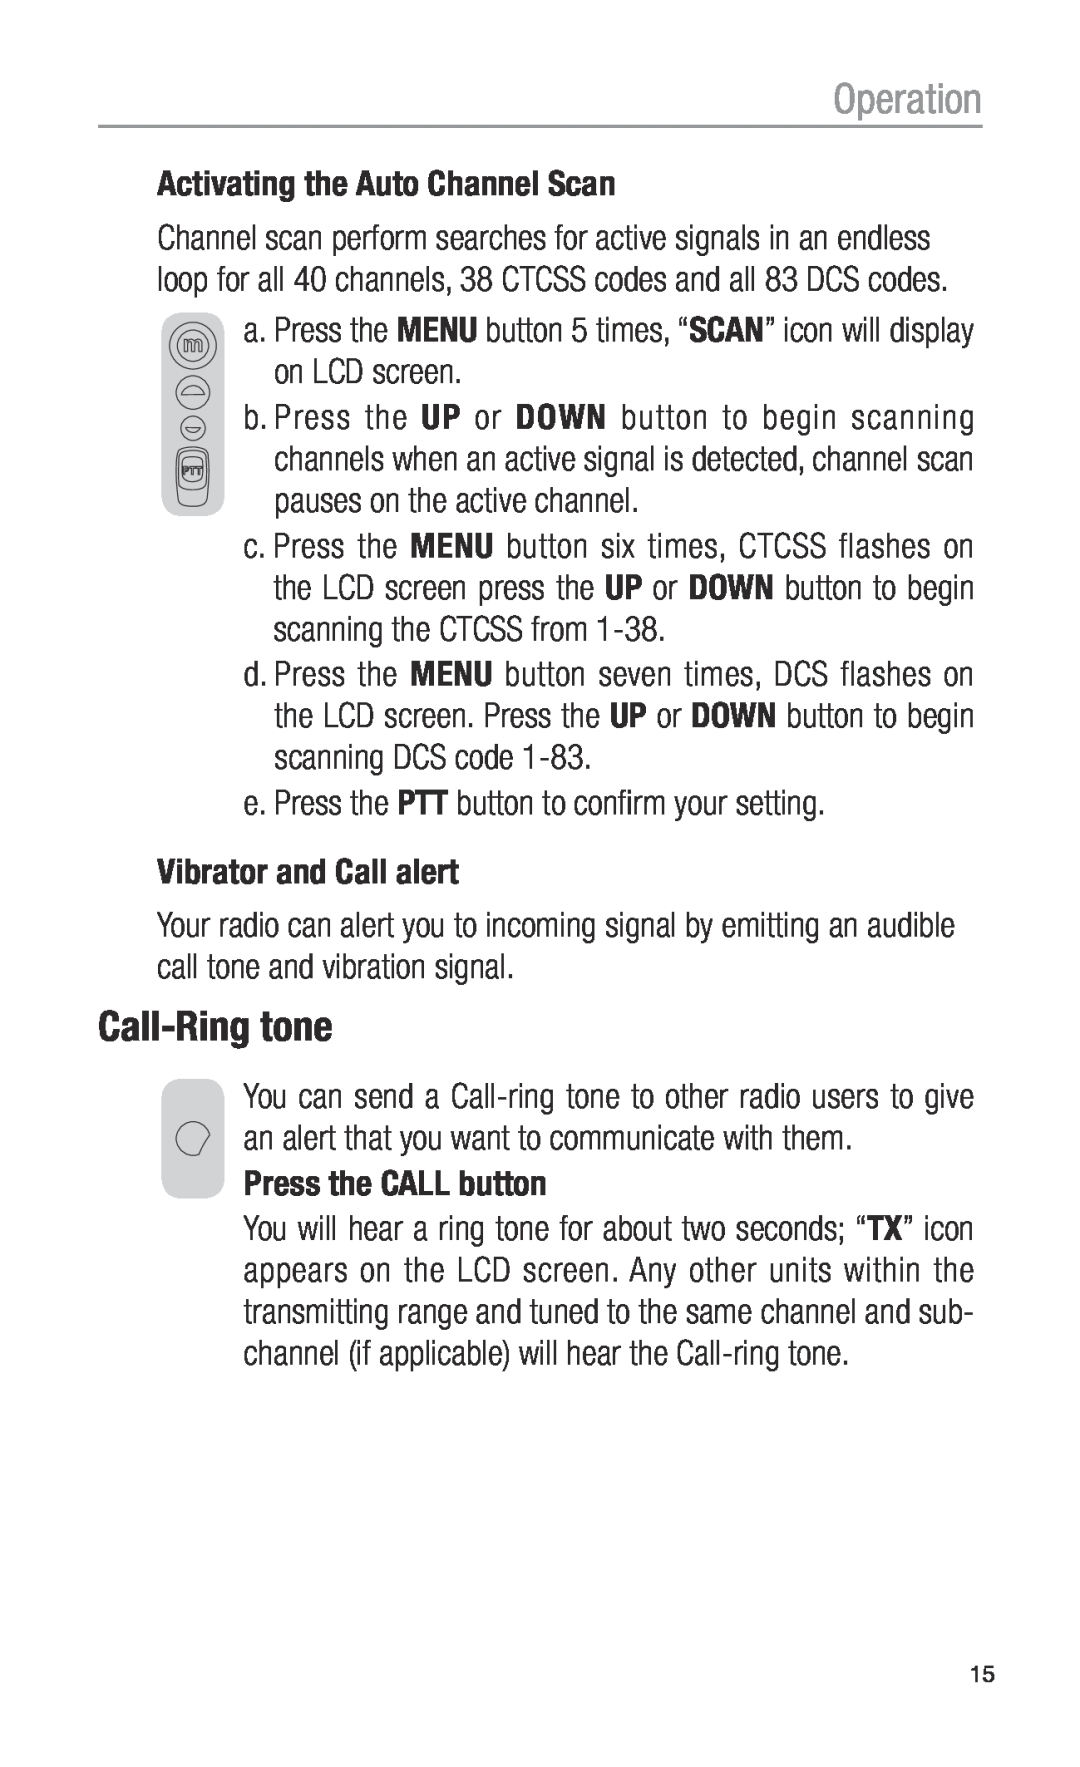 Oricom UHF2100 Call-Ringtone, Operation, Activating the Auto Channel Scan, e. Press the PTT button to confirm your setting 